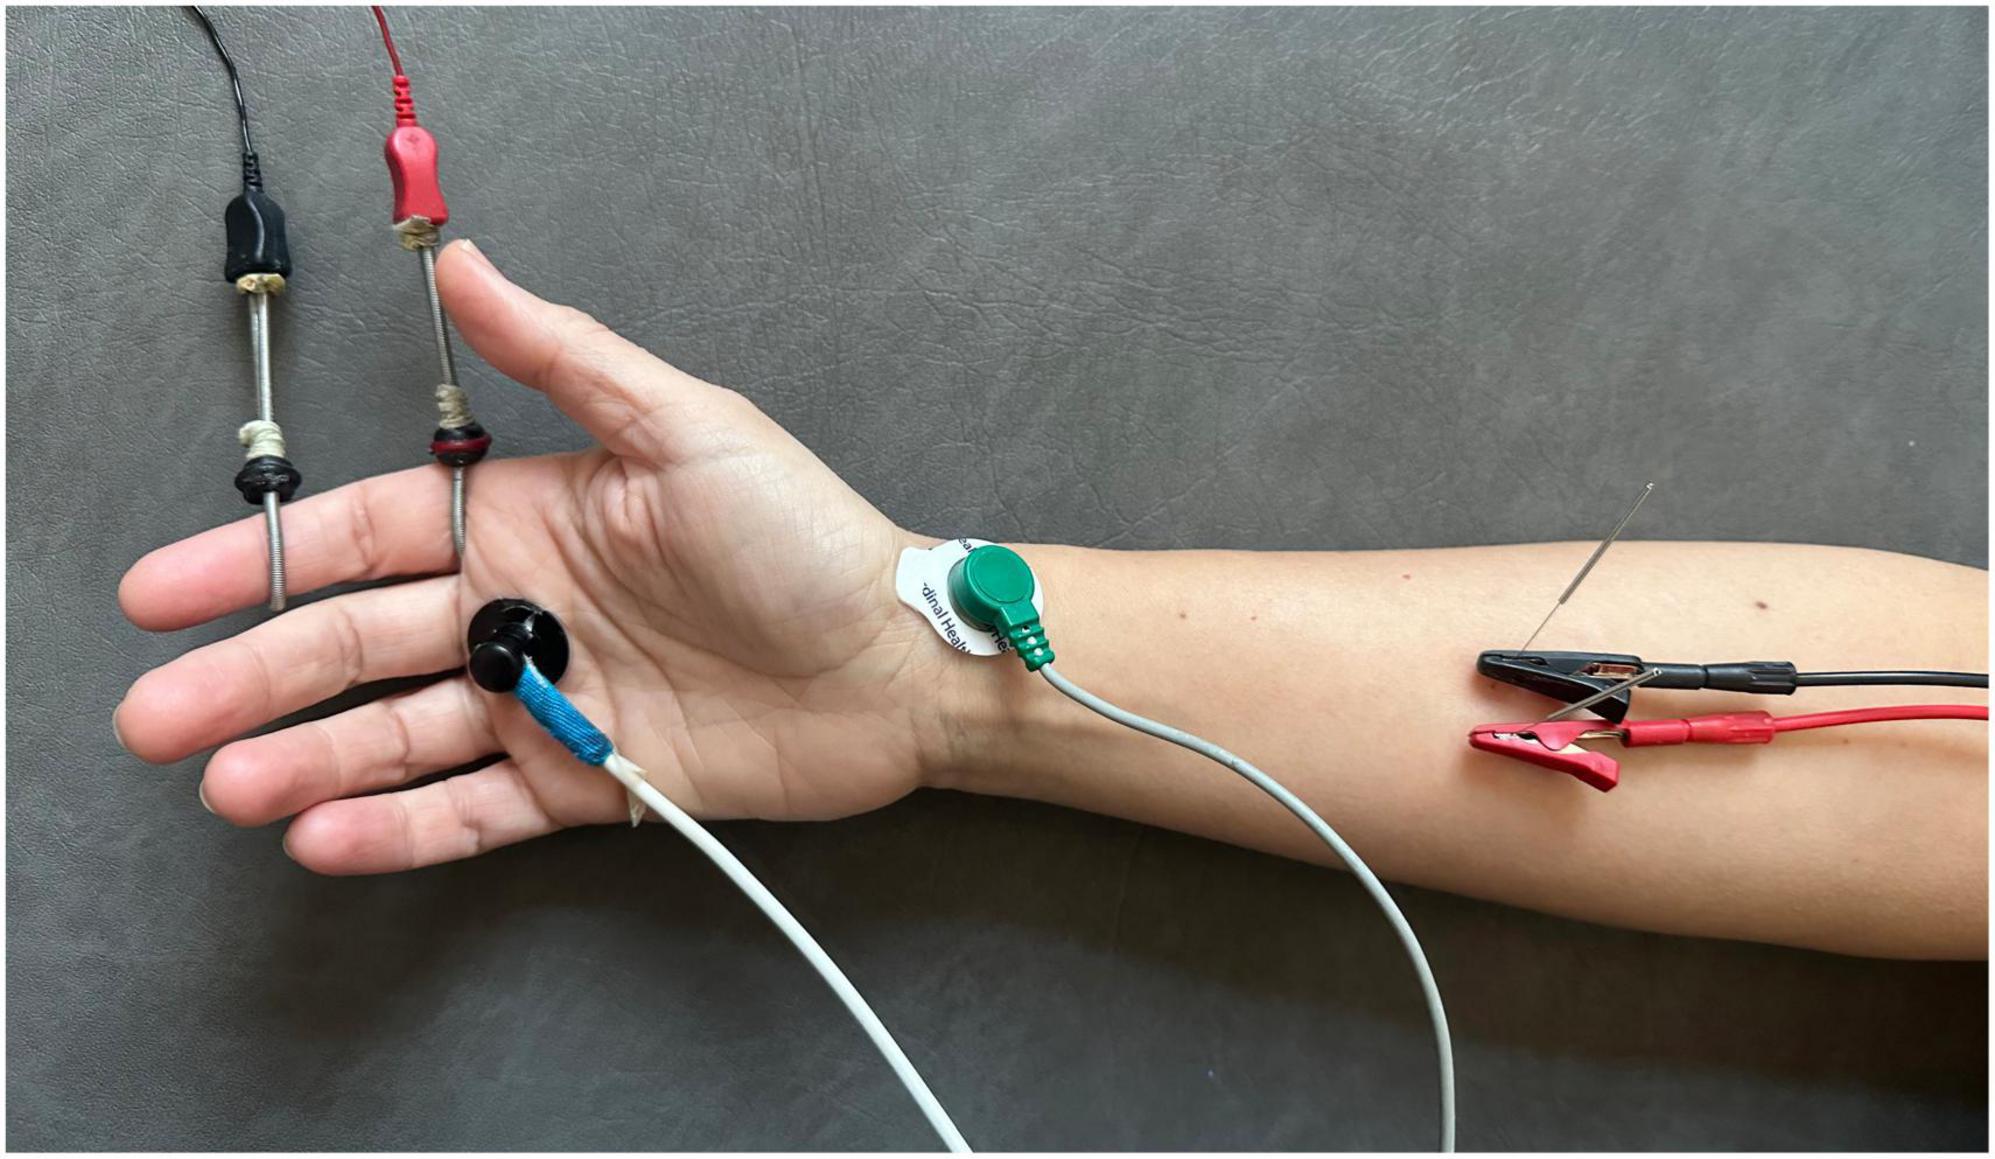 Electrical Stimulation: A Panacea for Disease? - IEEE Pulse